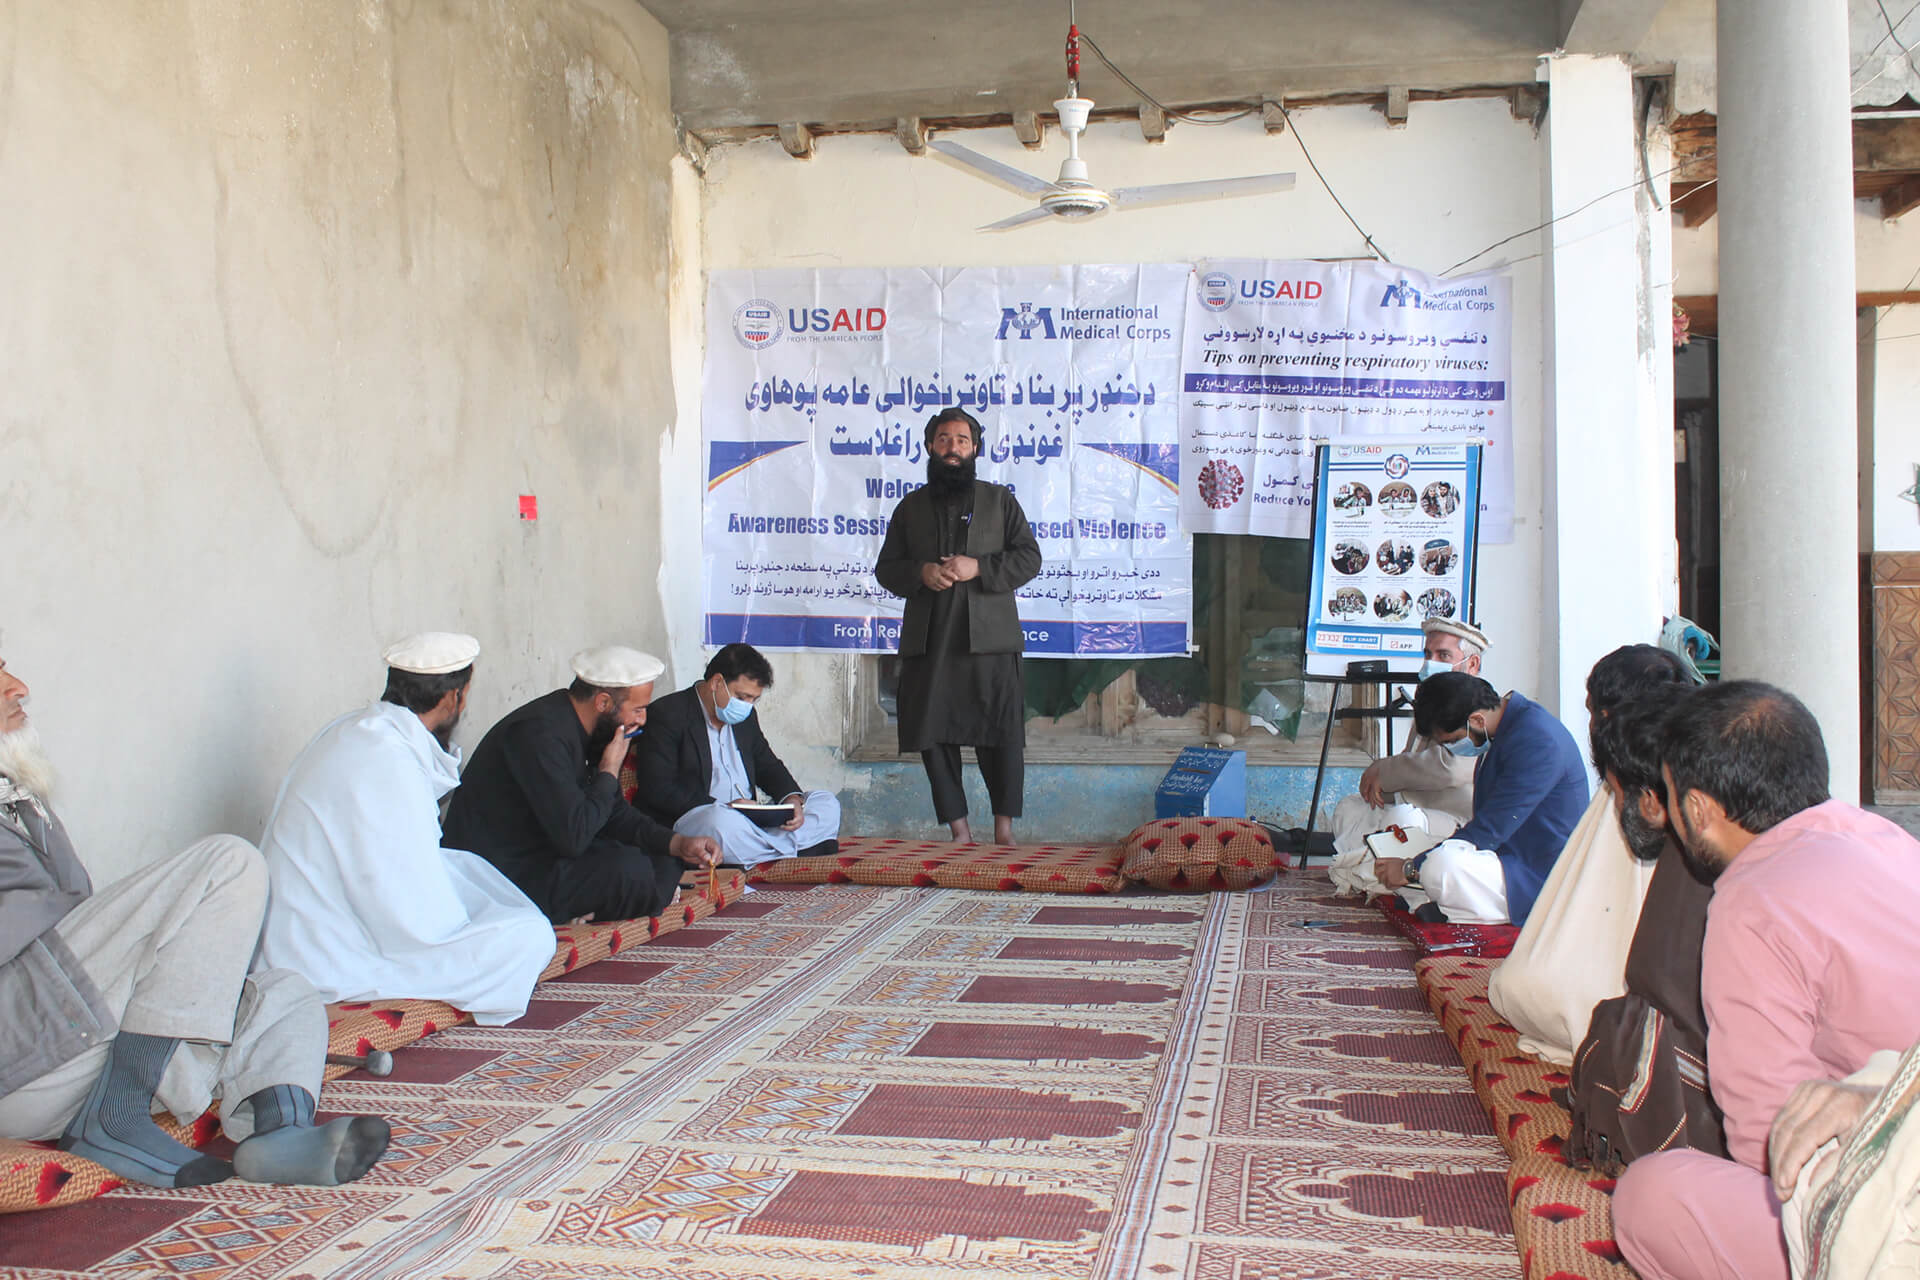 Our team in Afghanistan is tackling gender-based violence by working with community leaders.